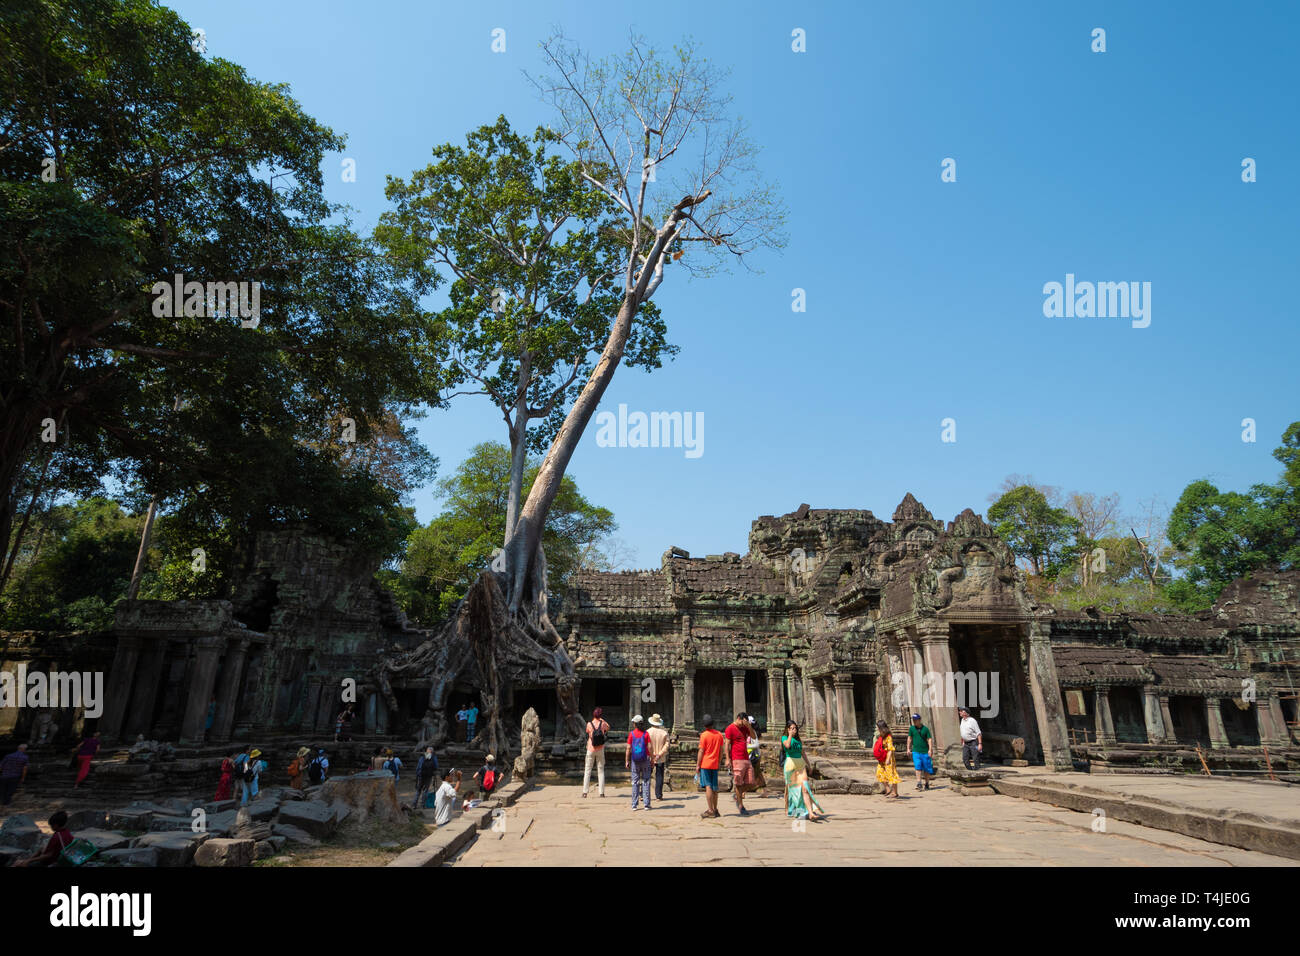 Preah Khan ancient hindu temple Interior area. Part of Angkor Wat archeological park in Cambodia close to Siem Reap Stock Photo